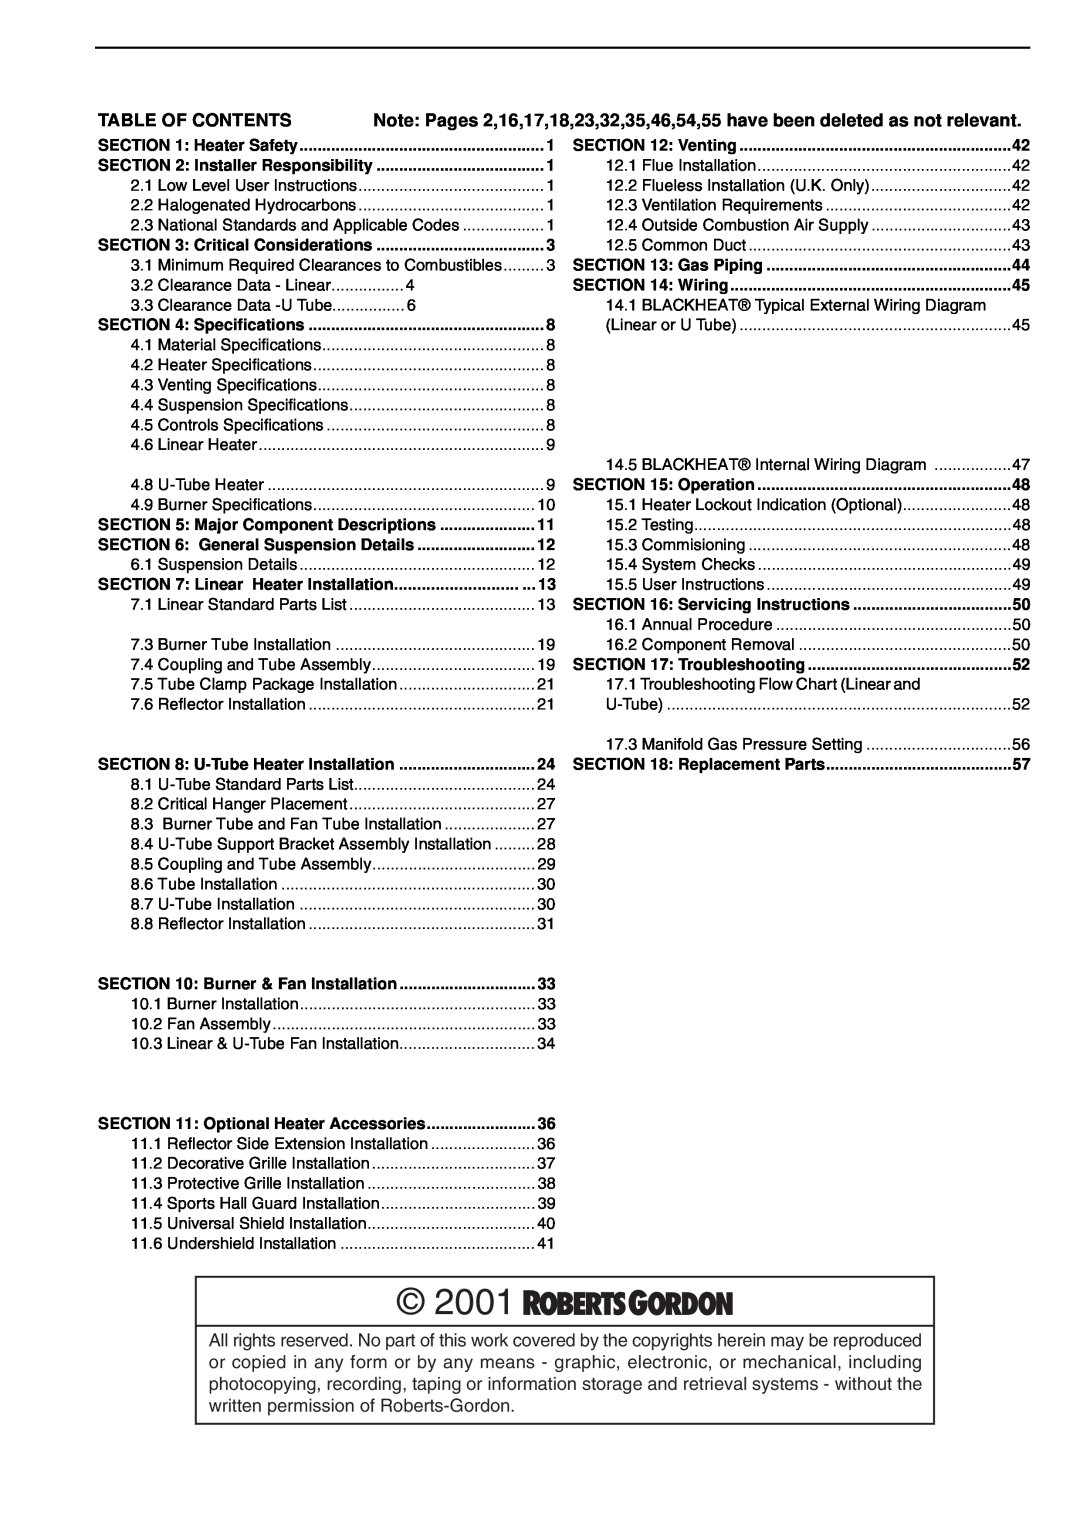 Roberts Gorden BH15 service manual 2001, Table Of Contents 